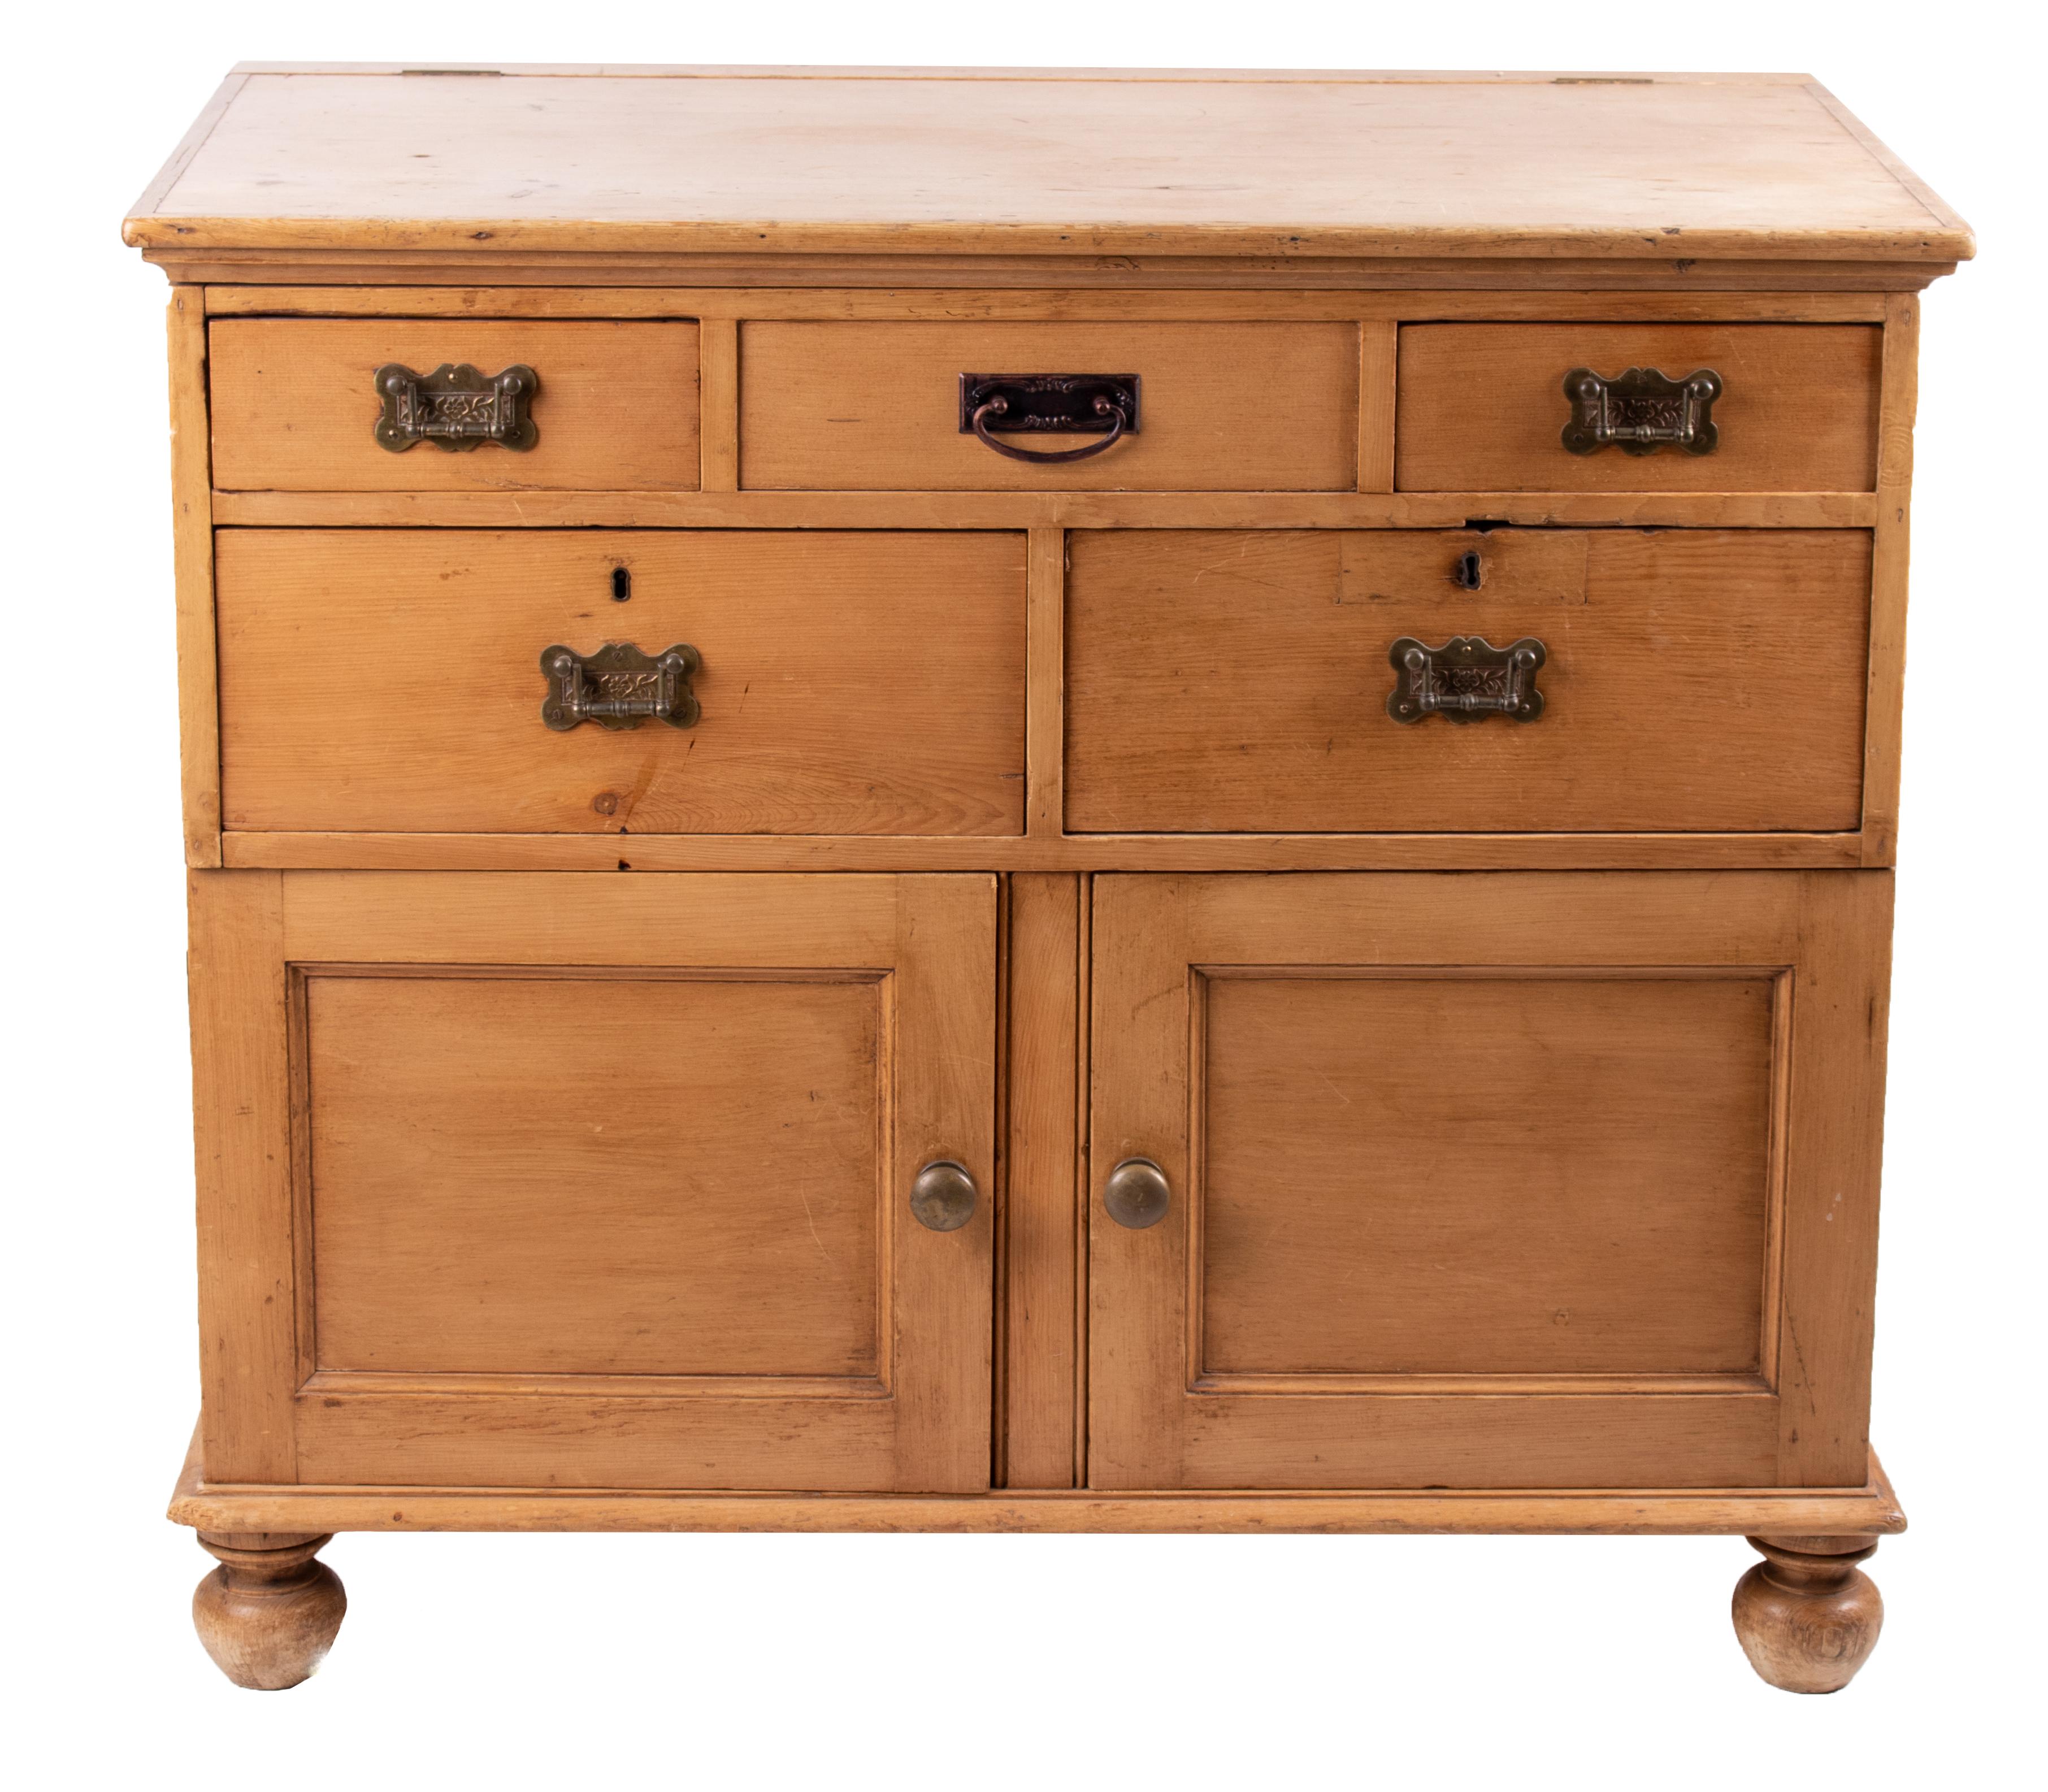 19th century French wash-room five-drawer chest with two panel doors.